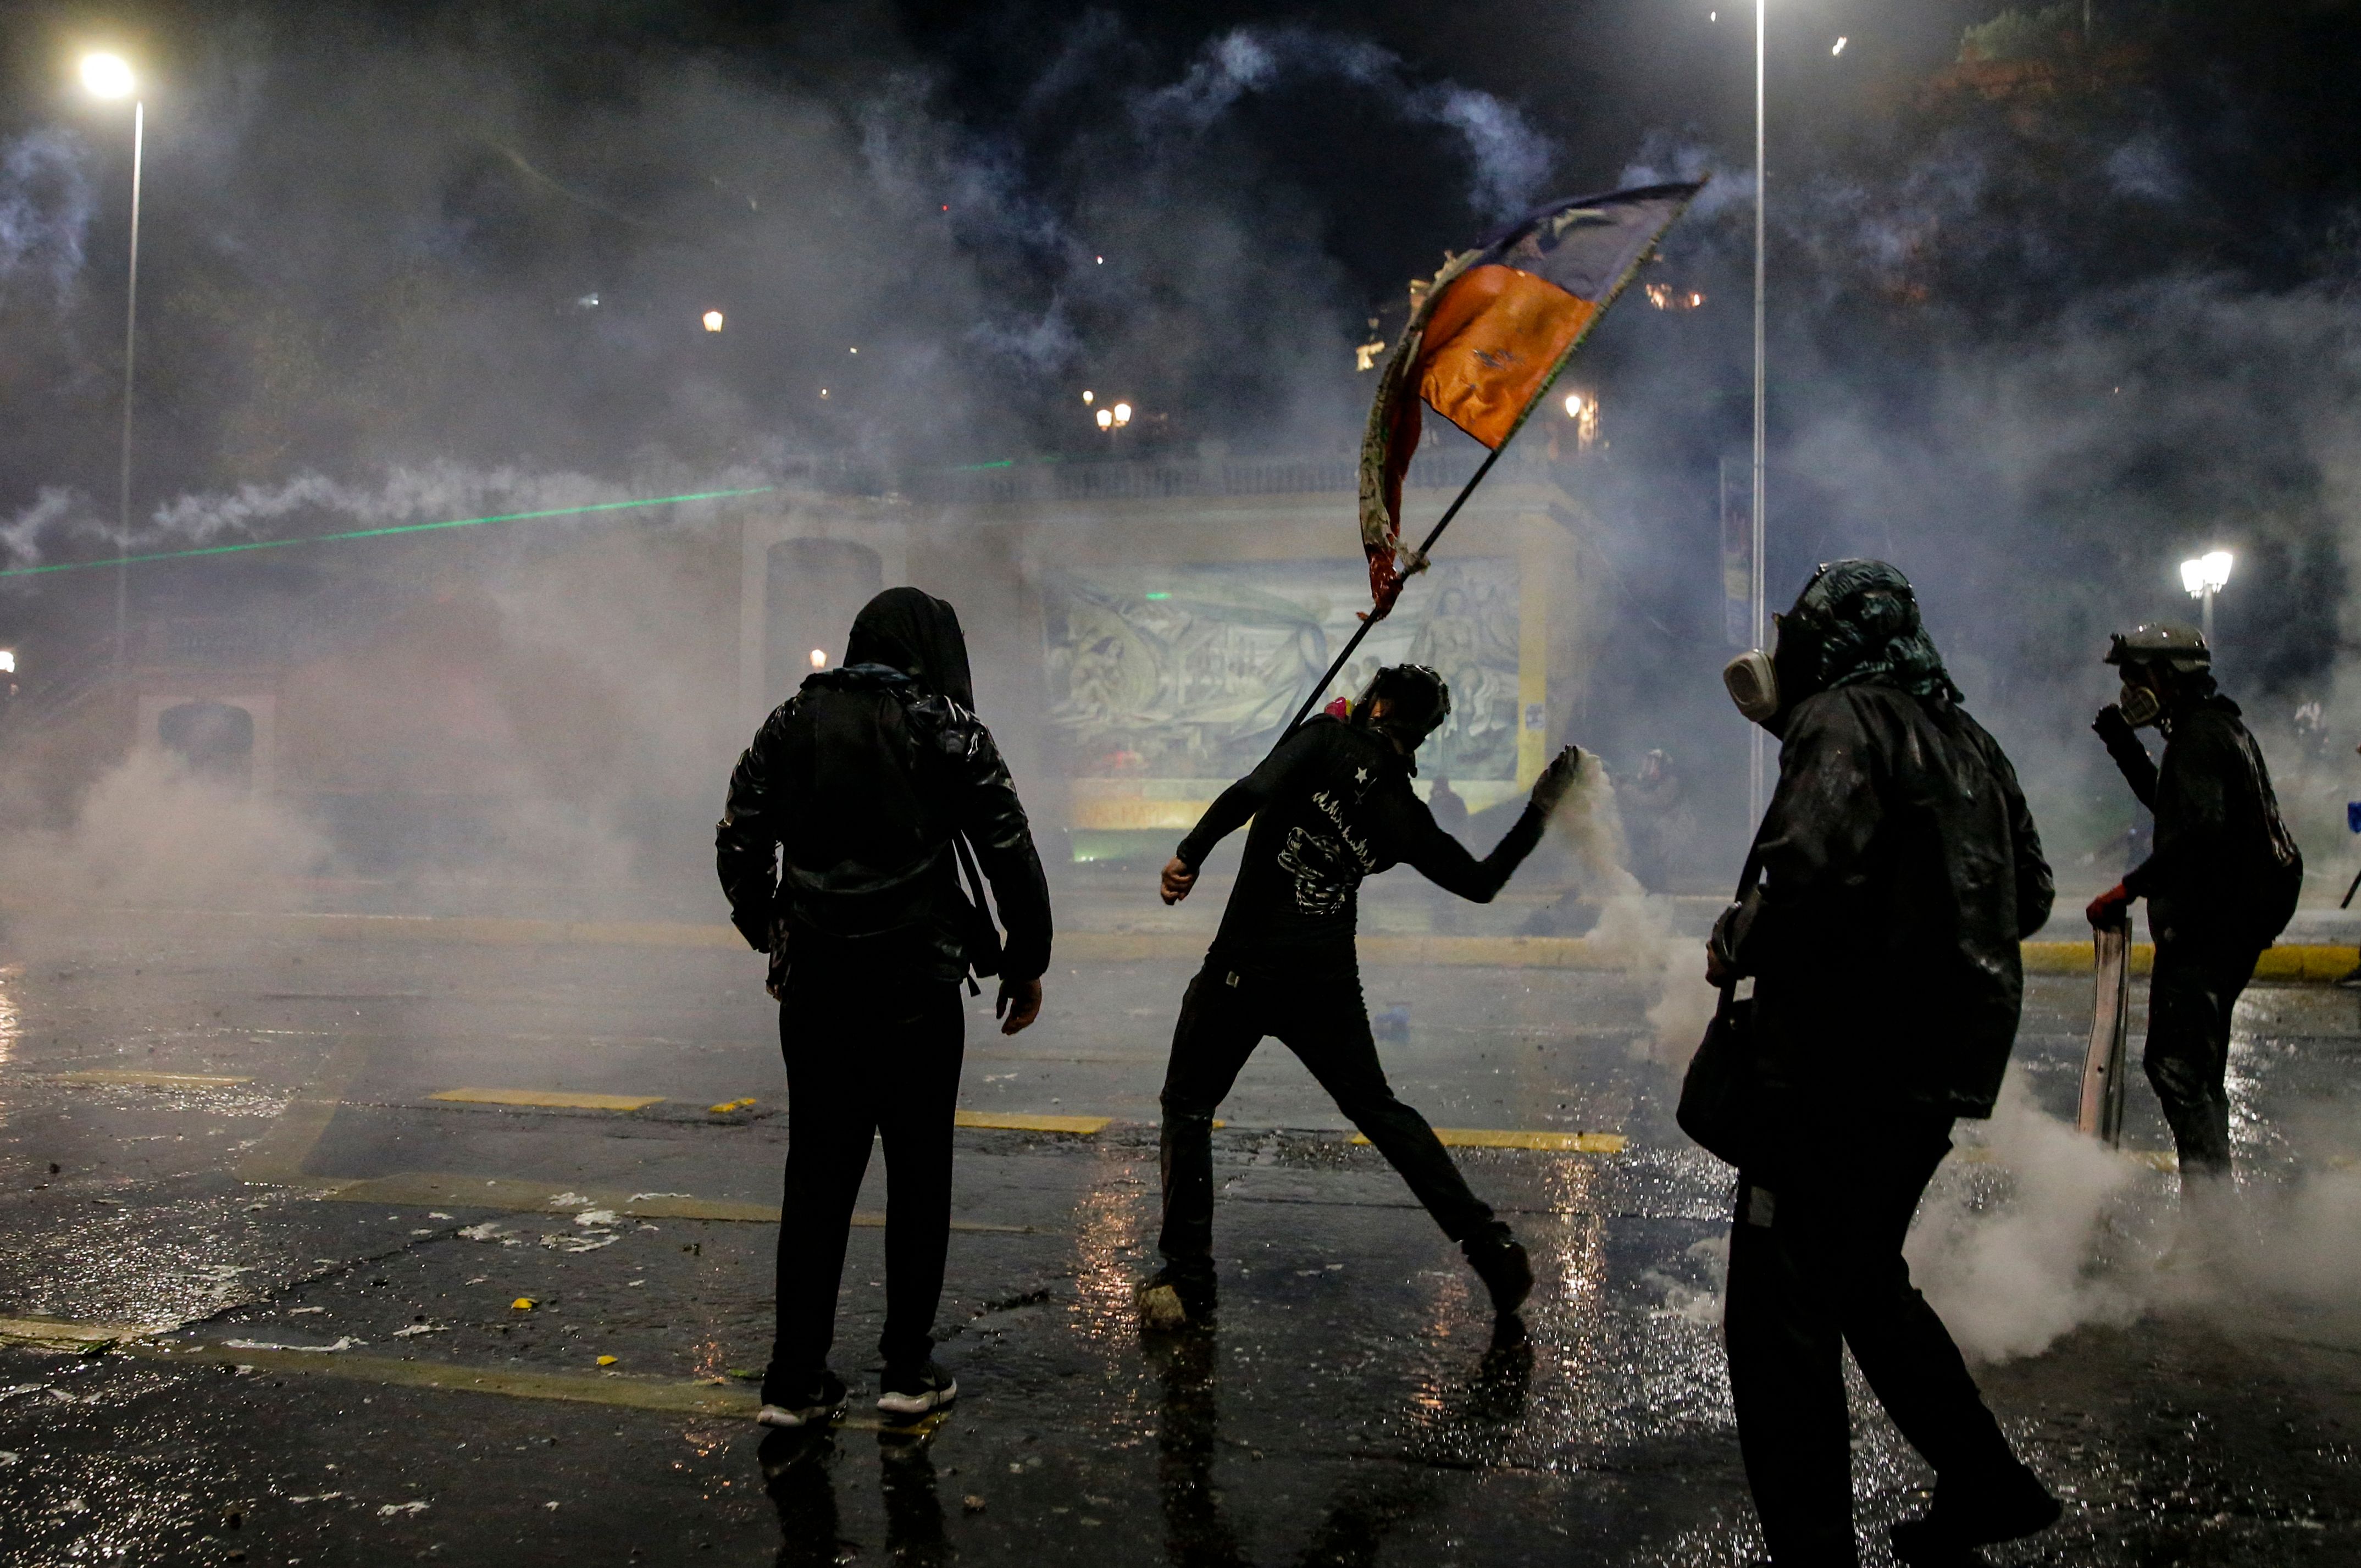 Demonstrators clash with the police during a protest in Santiago, on Oct. 18.